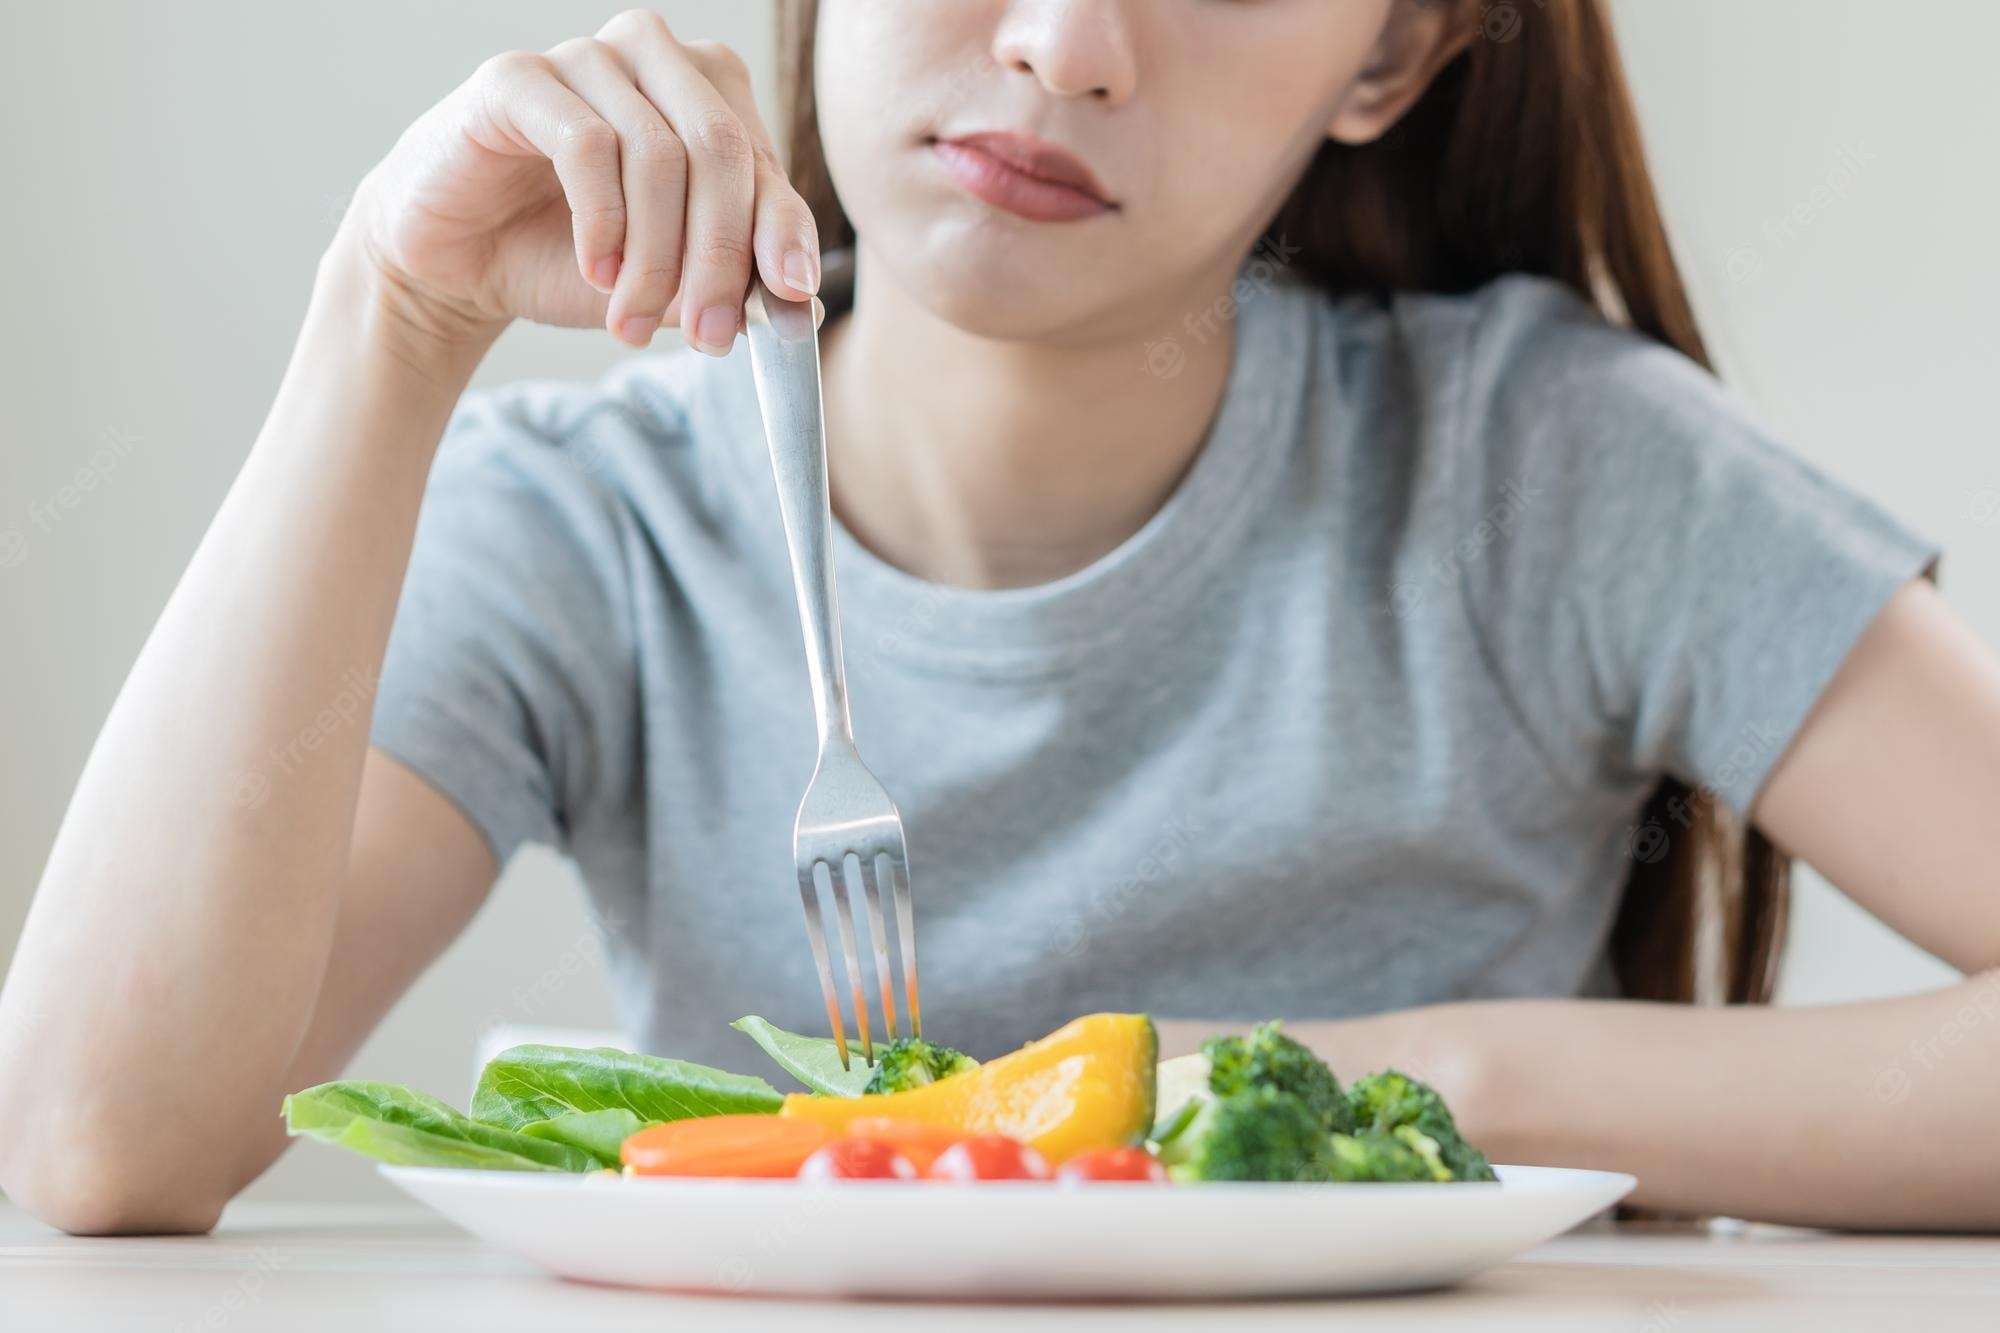 control your eating habits to manage depression